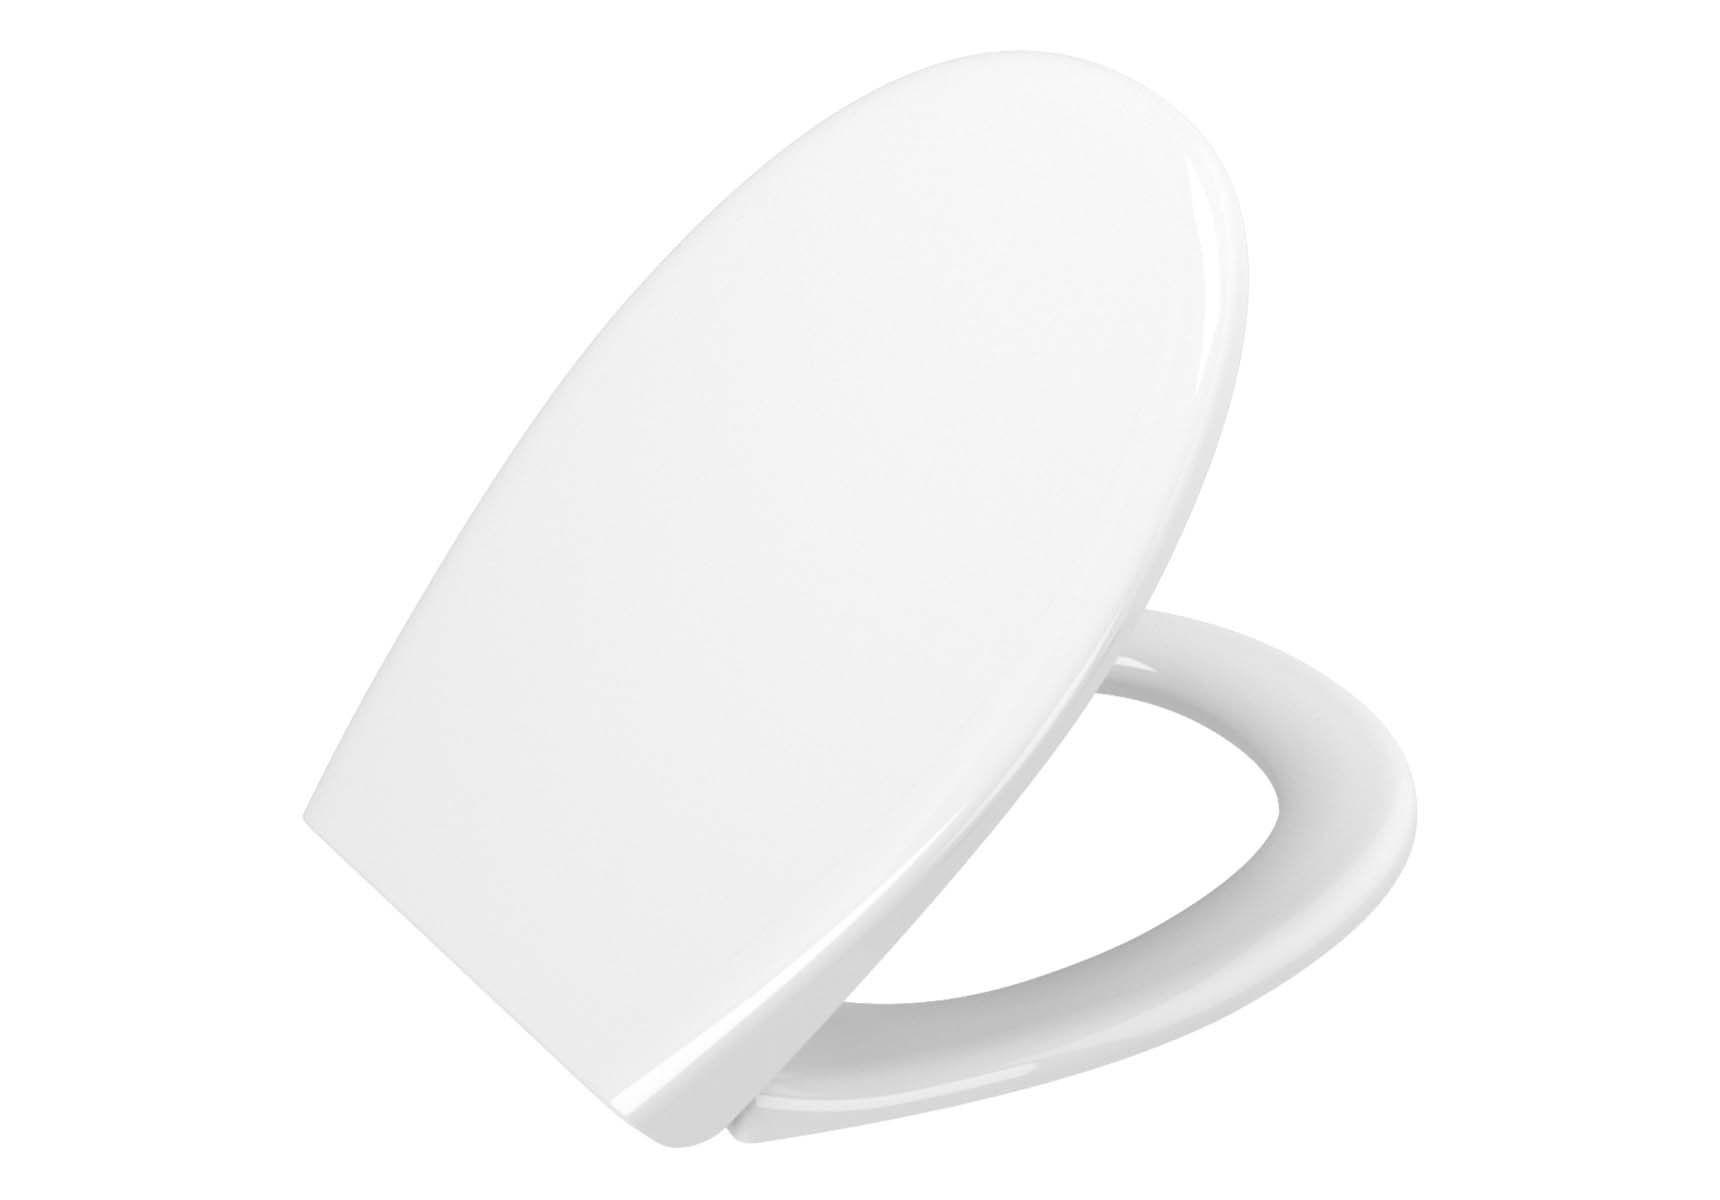 Universal Toilet Seat Model 1 - Oval Form (Duroplast, Soft-Closing, Detachable Metal Hinge, Top Fixing, Quick Release)